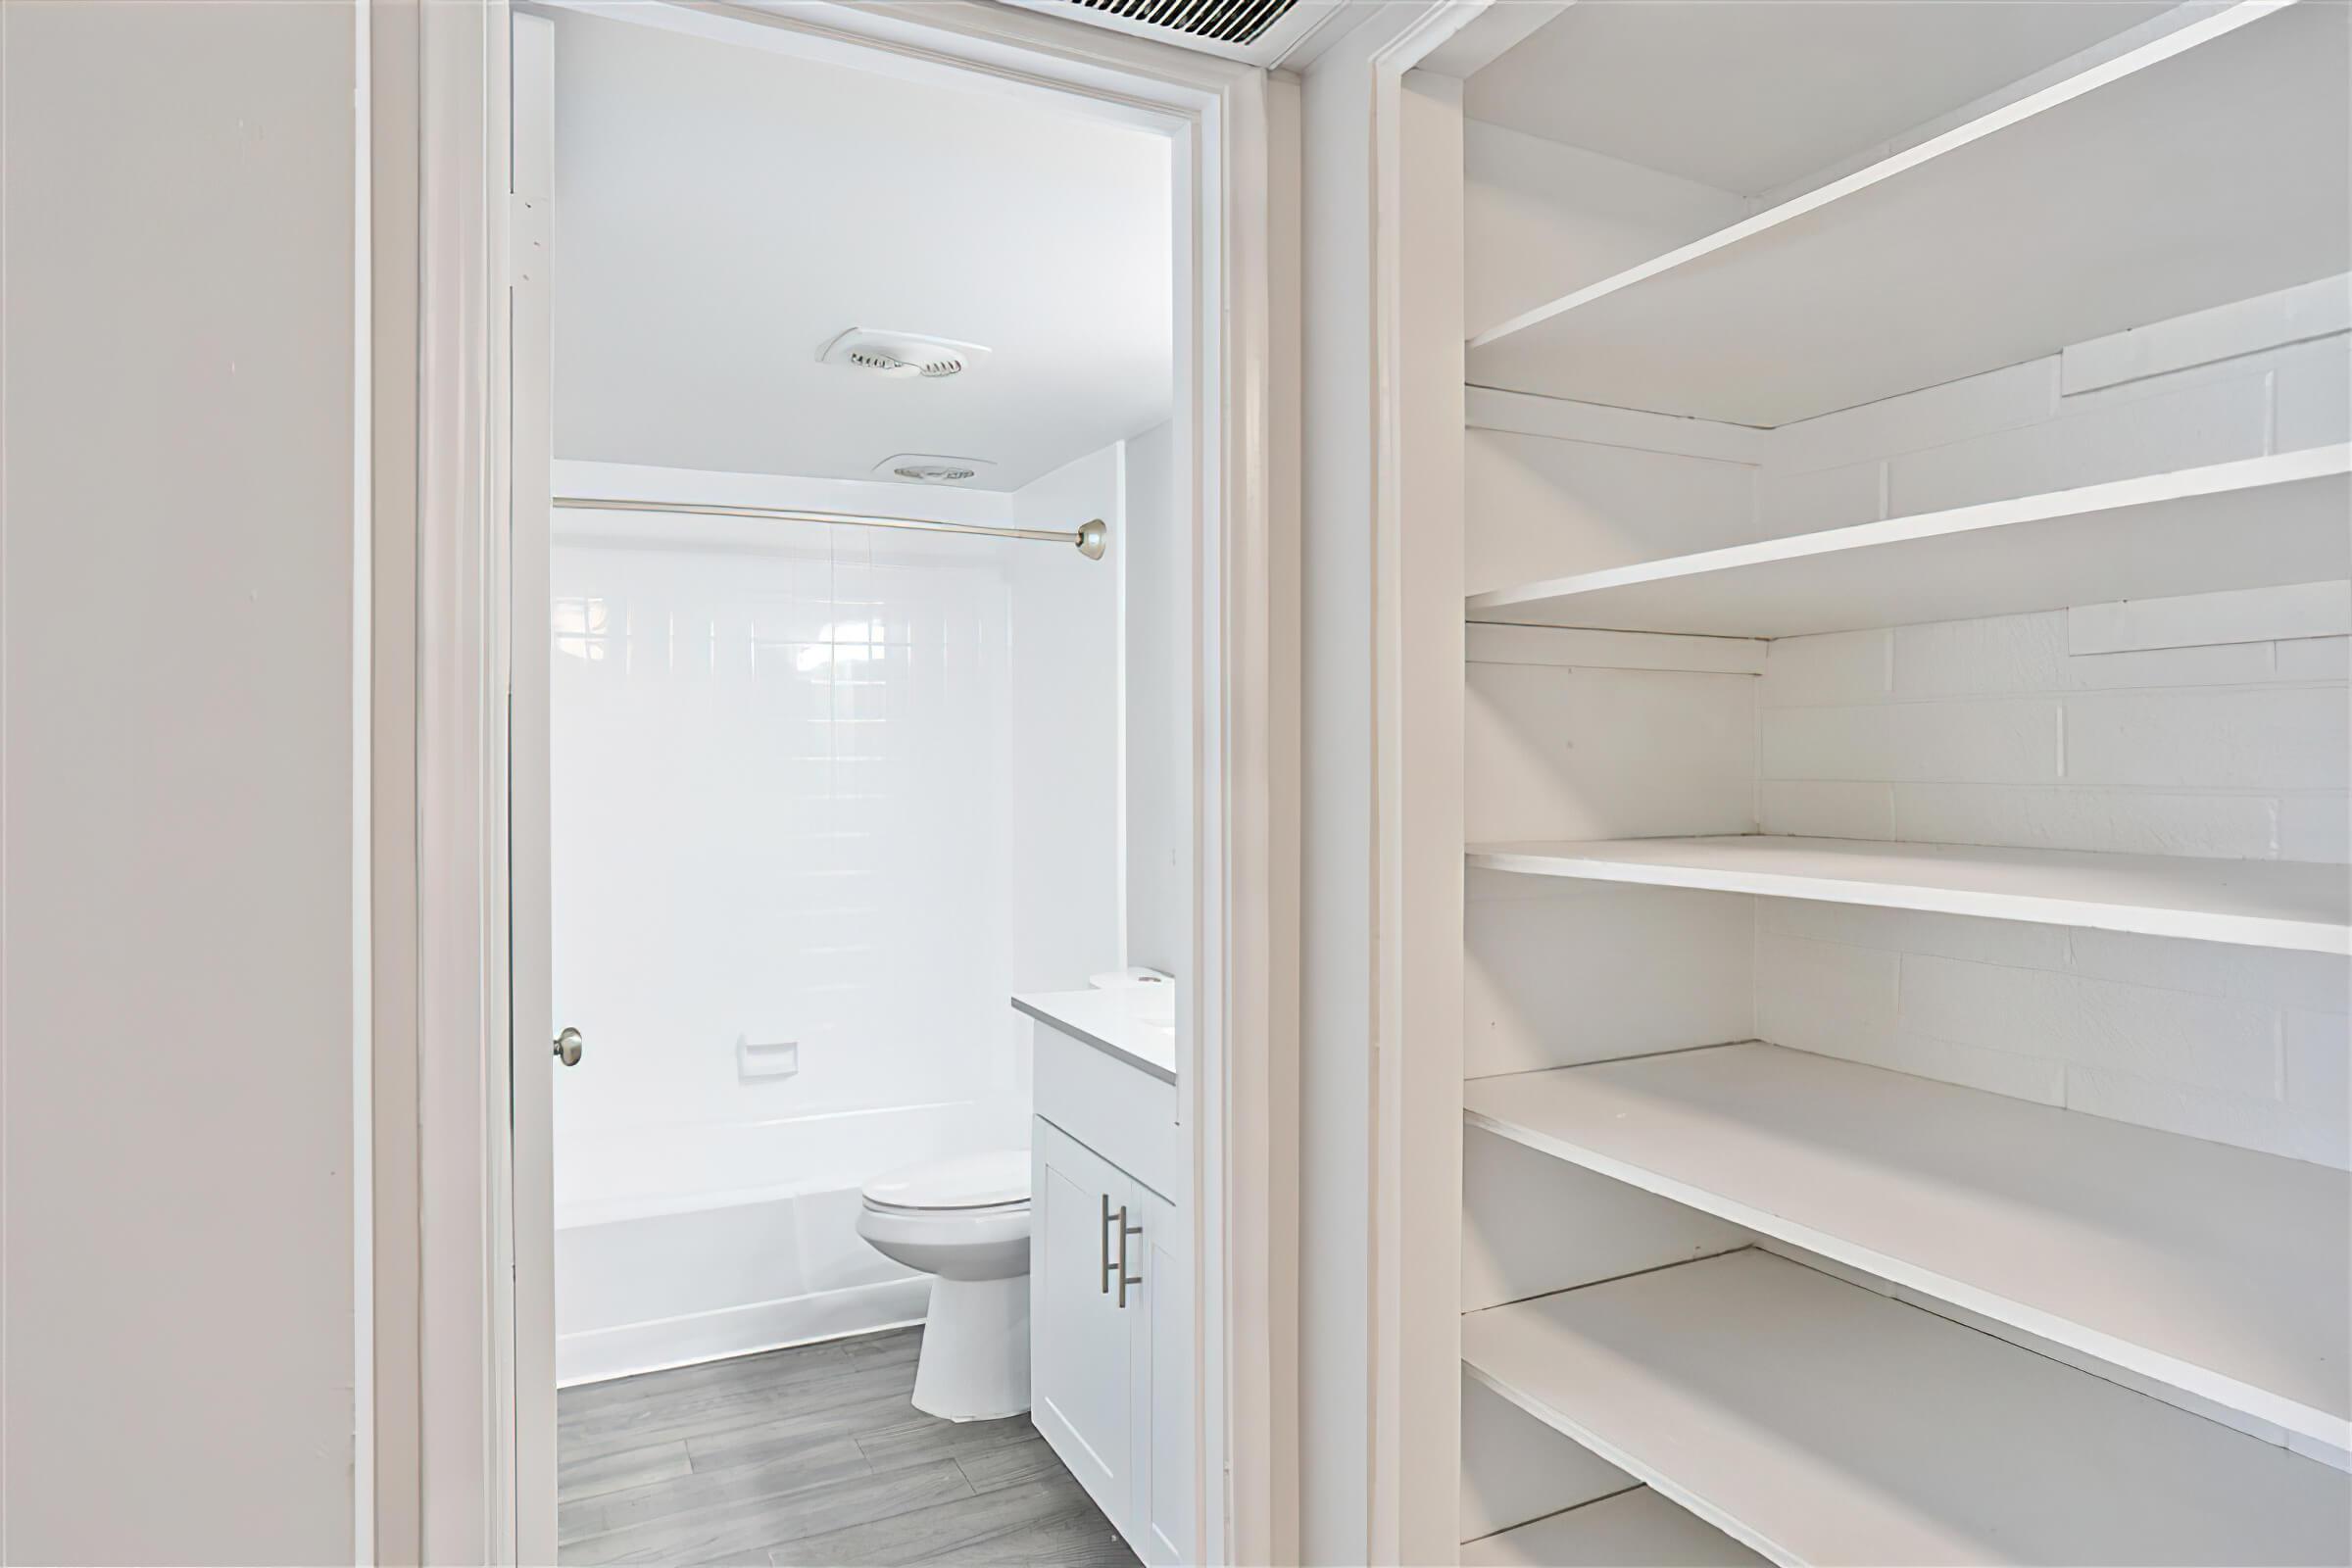 View of clean modern restroom from a walk in closet with floor to ceiling shelving